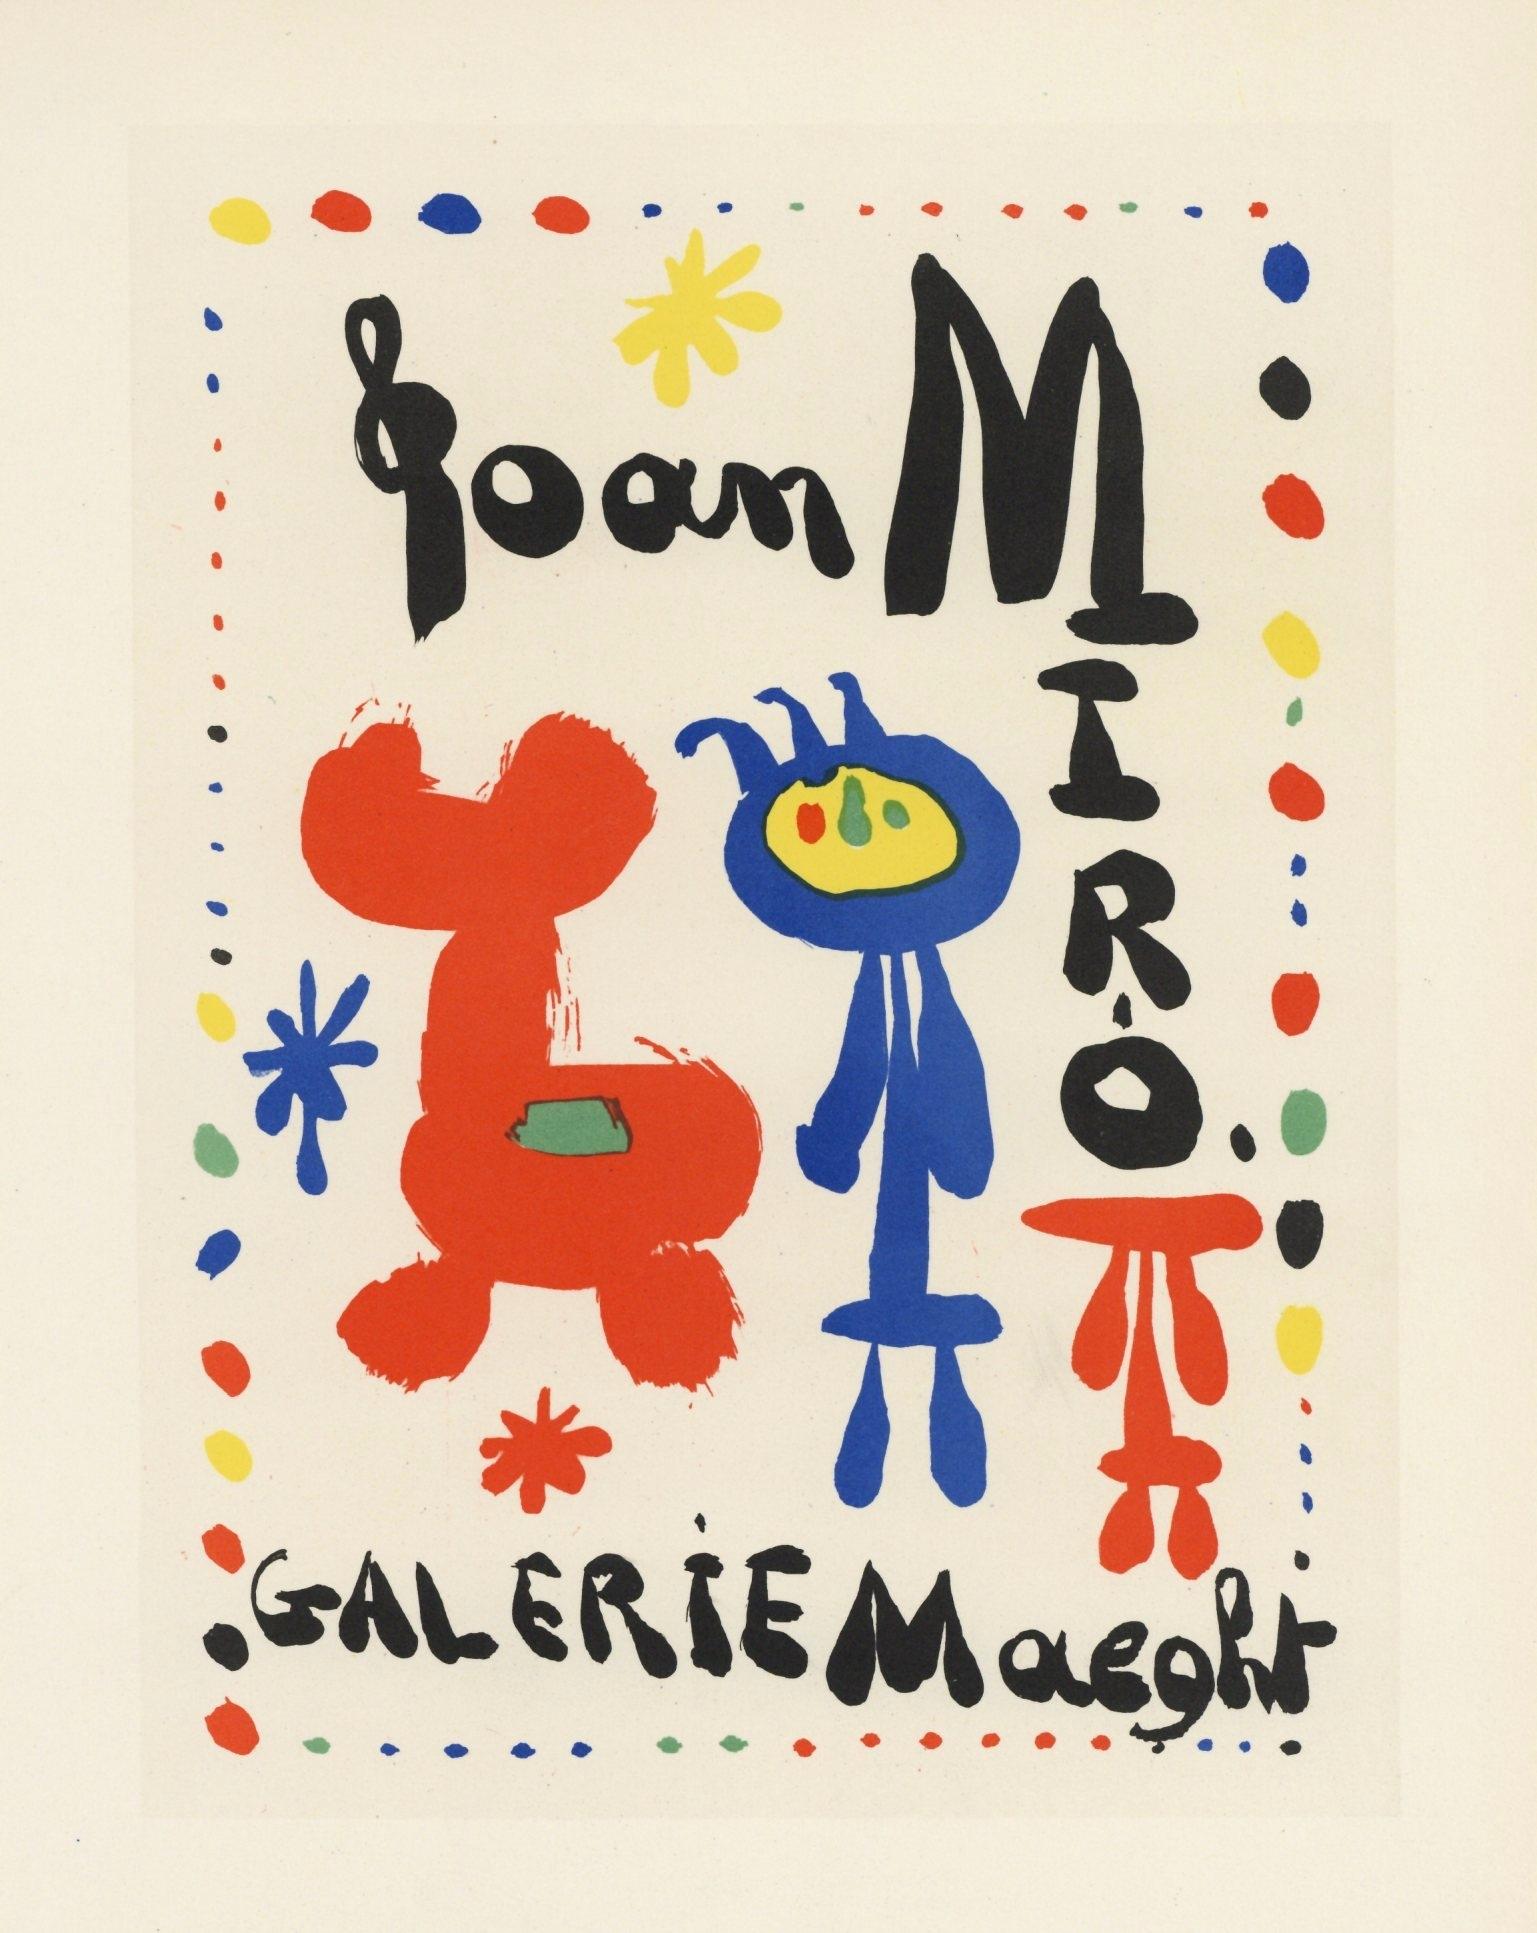 "Gallerie Maeght" lithograph poster - Print by (after) Joan Miró